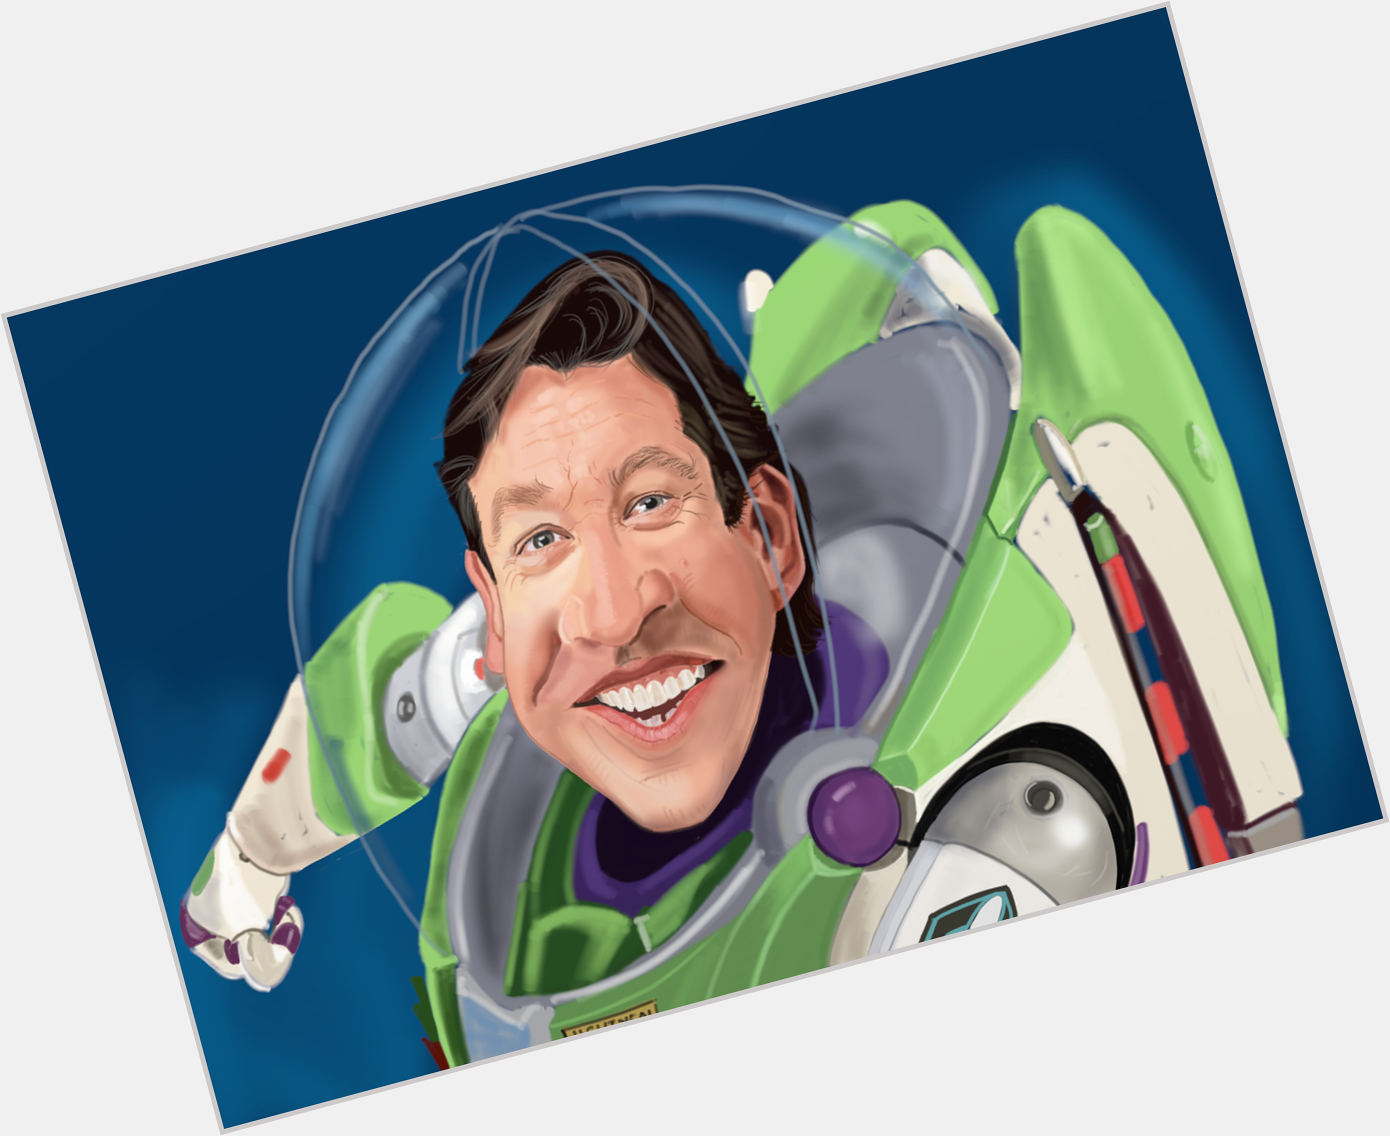 Let\s all wish Tim Allen a happy Bday - check out his wish at 